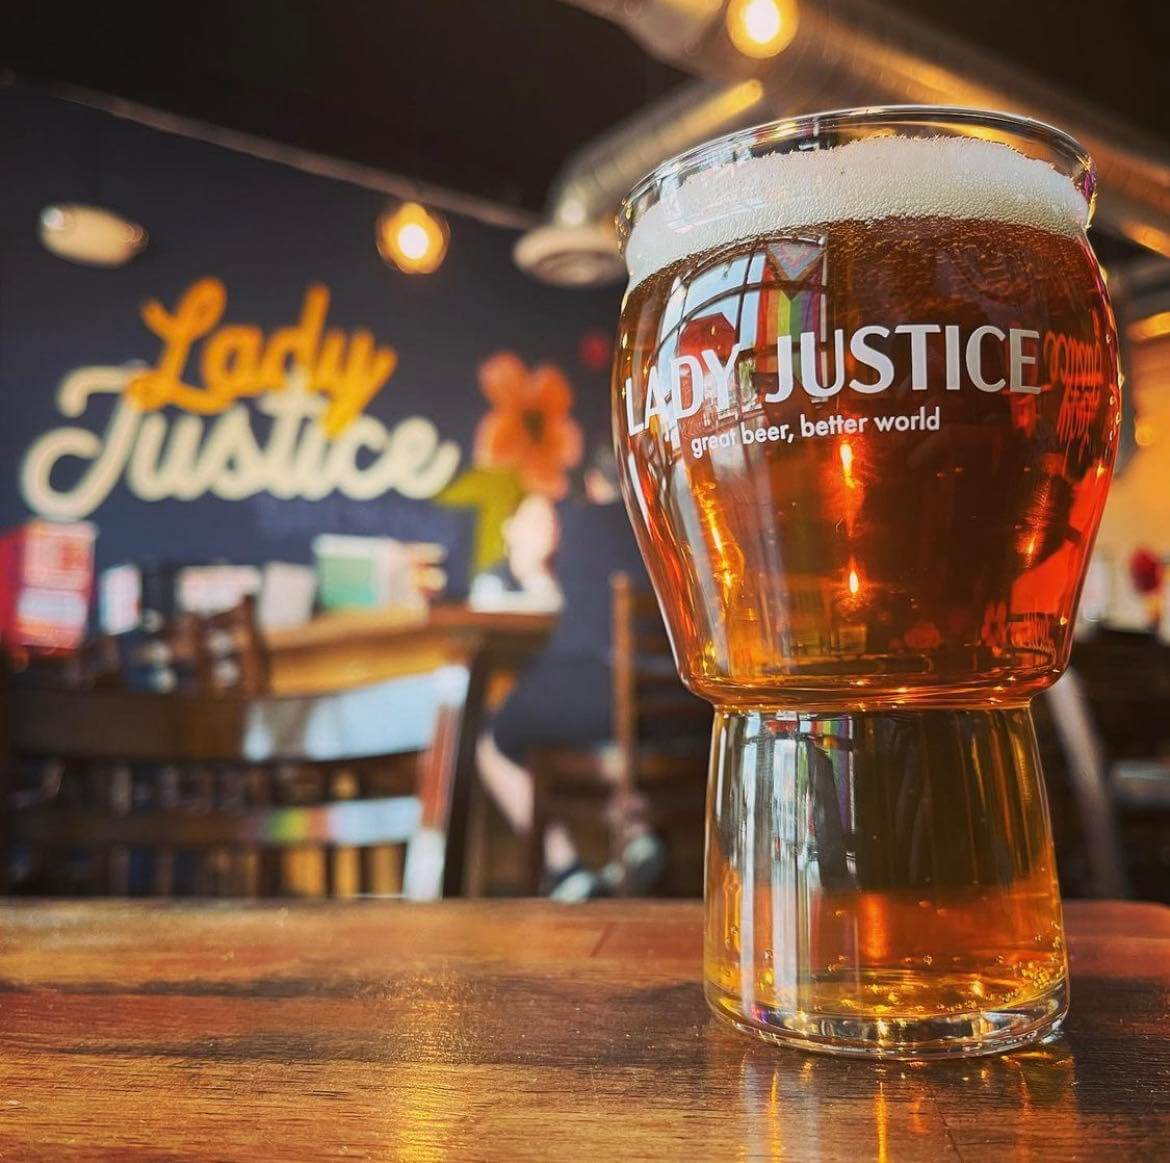 Beer in Lady Justice Brewing glass